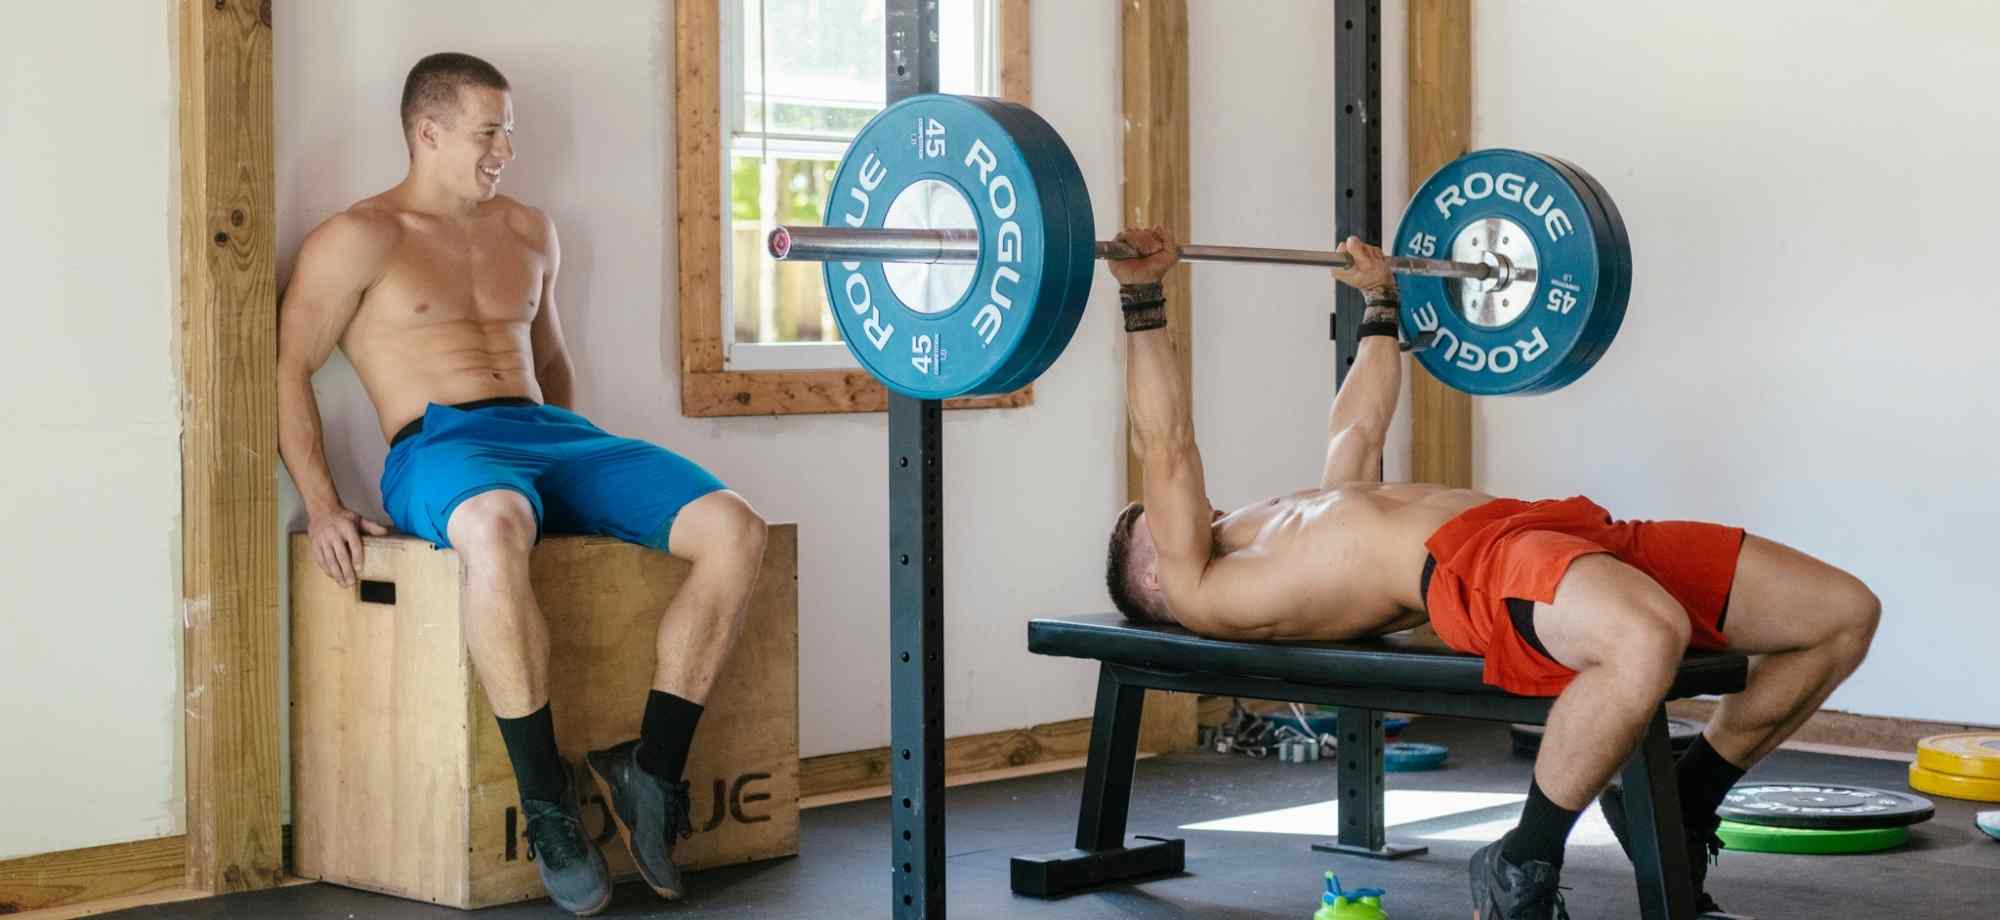 Twin CrossFit Stars Saxon and Spencer Panchik on Risks and Execution